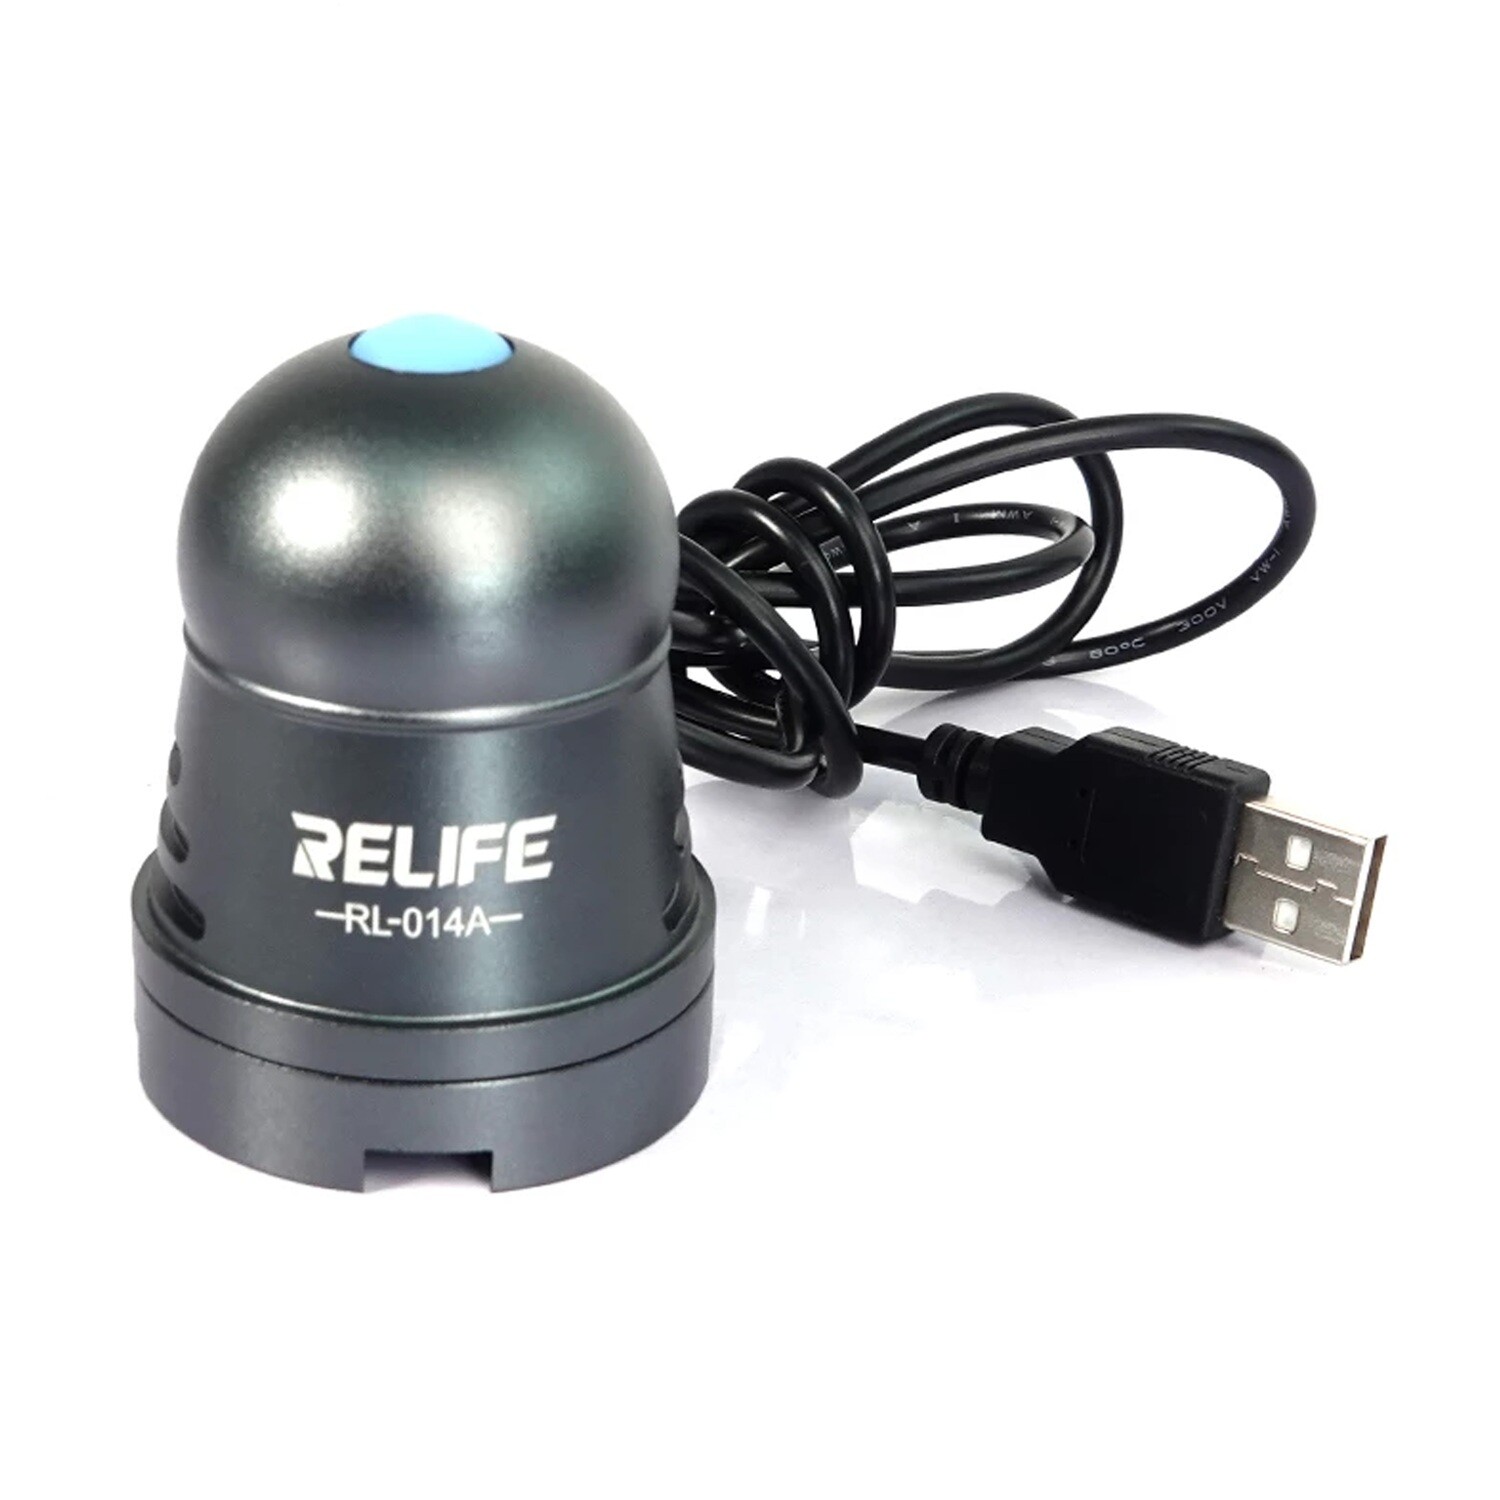 Fast UV Curing Lamp (Relife)